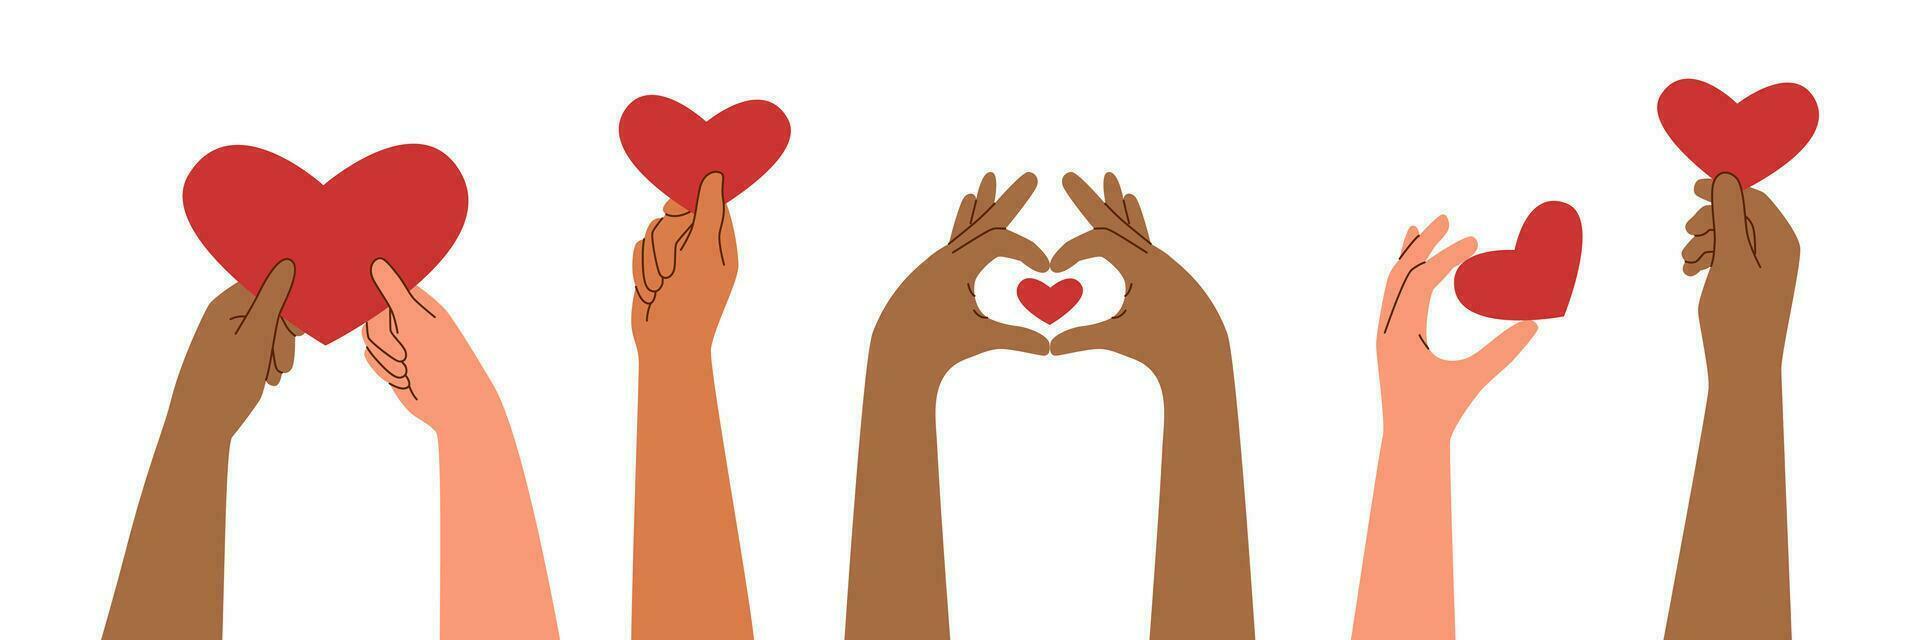 Hands raised up with hearts vector